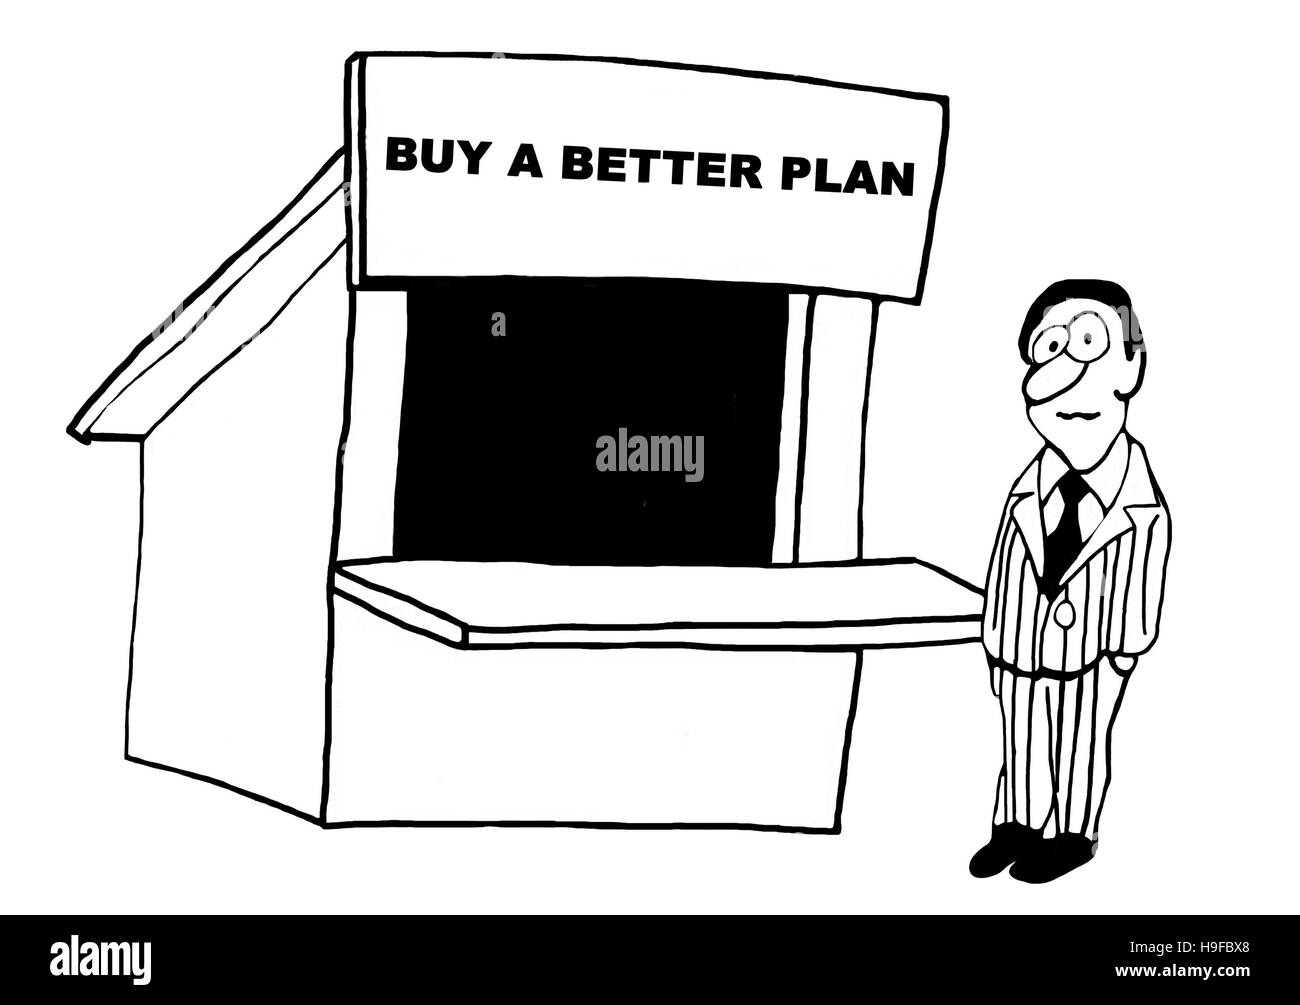 Black and white illustration of a man pondering whether to buy a better plan. Stock Photo